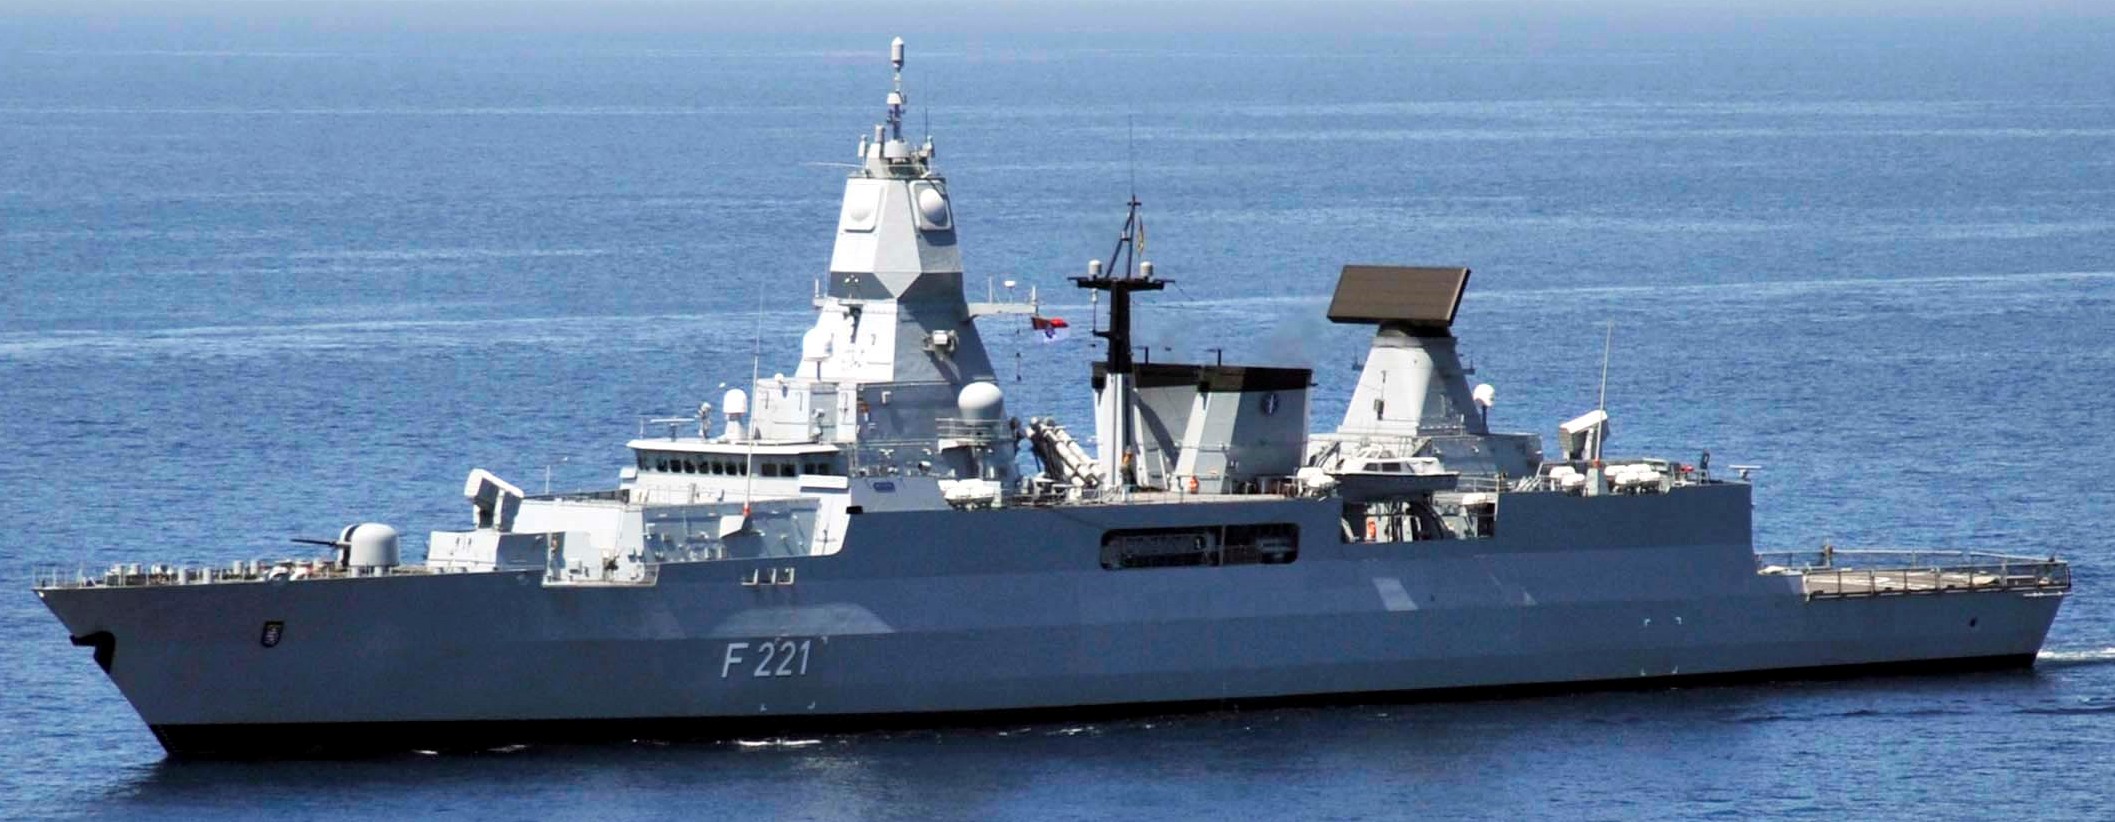 f-221 fgs hessen type 124 sachsen class guided missile frigate german navy 15